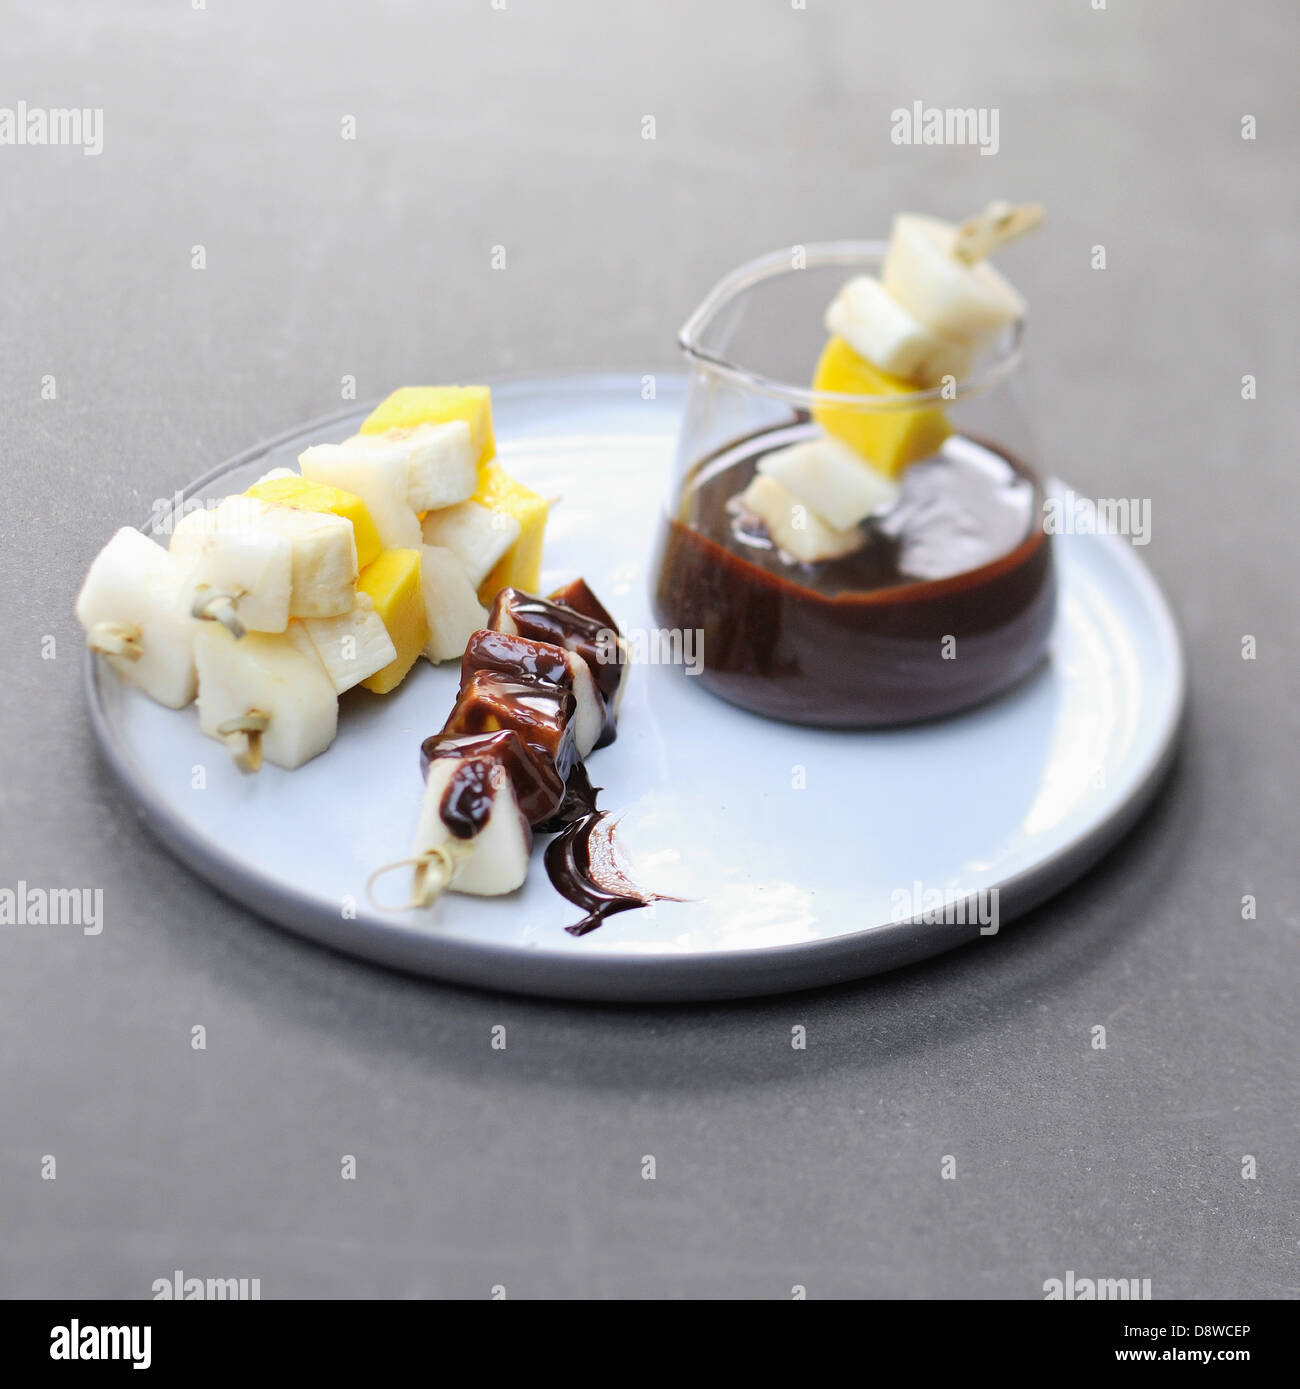 Fruit brochettes dipped in chocolate sauce Stock Photo